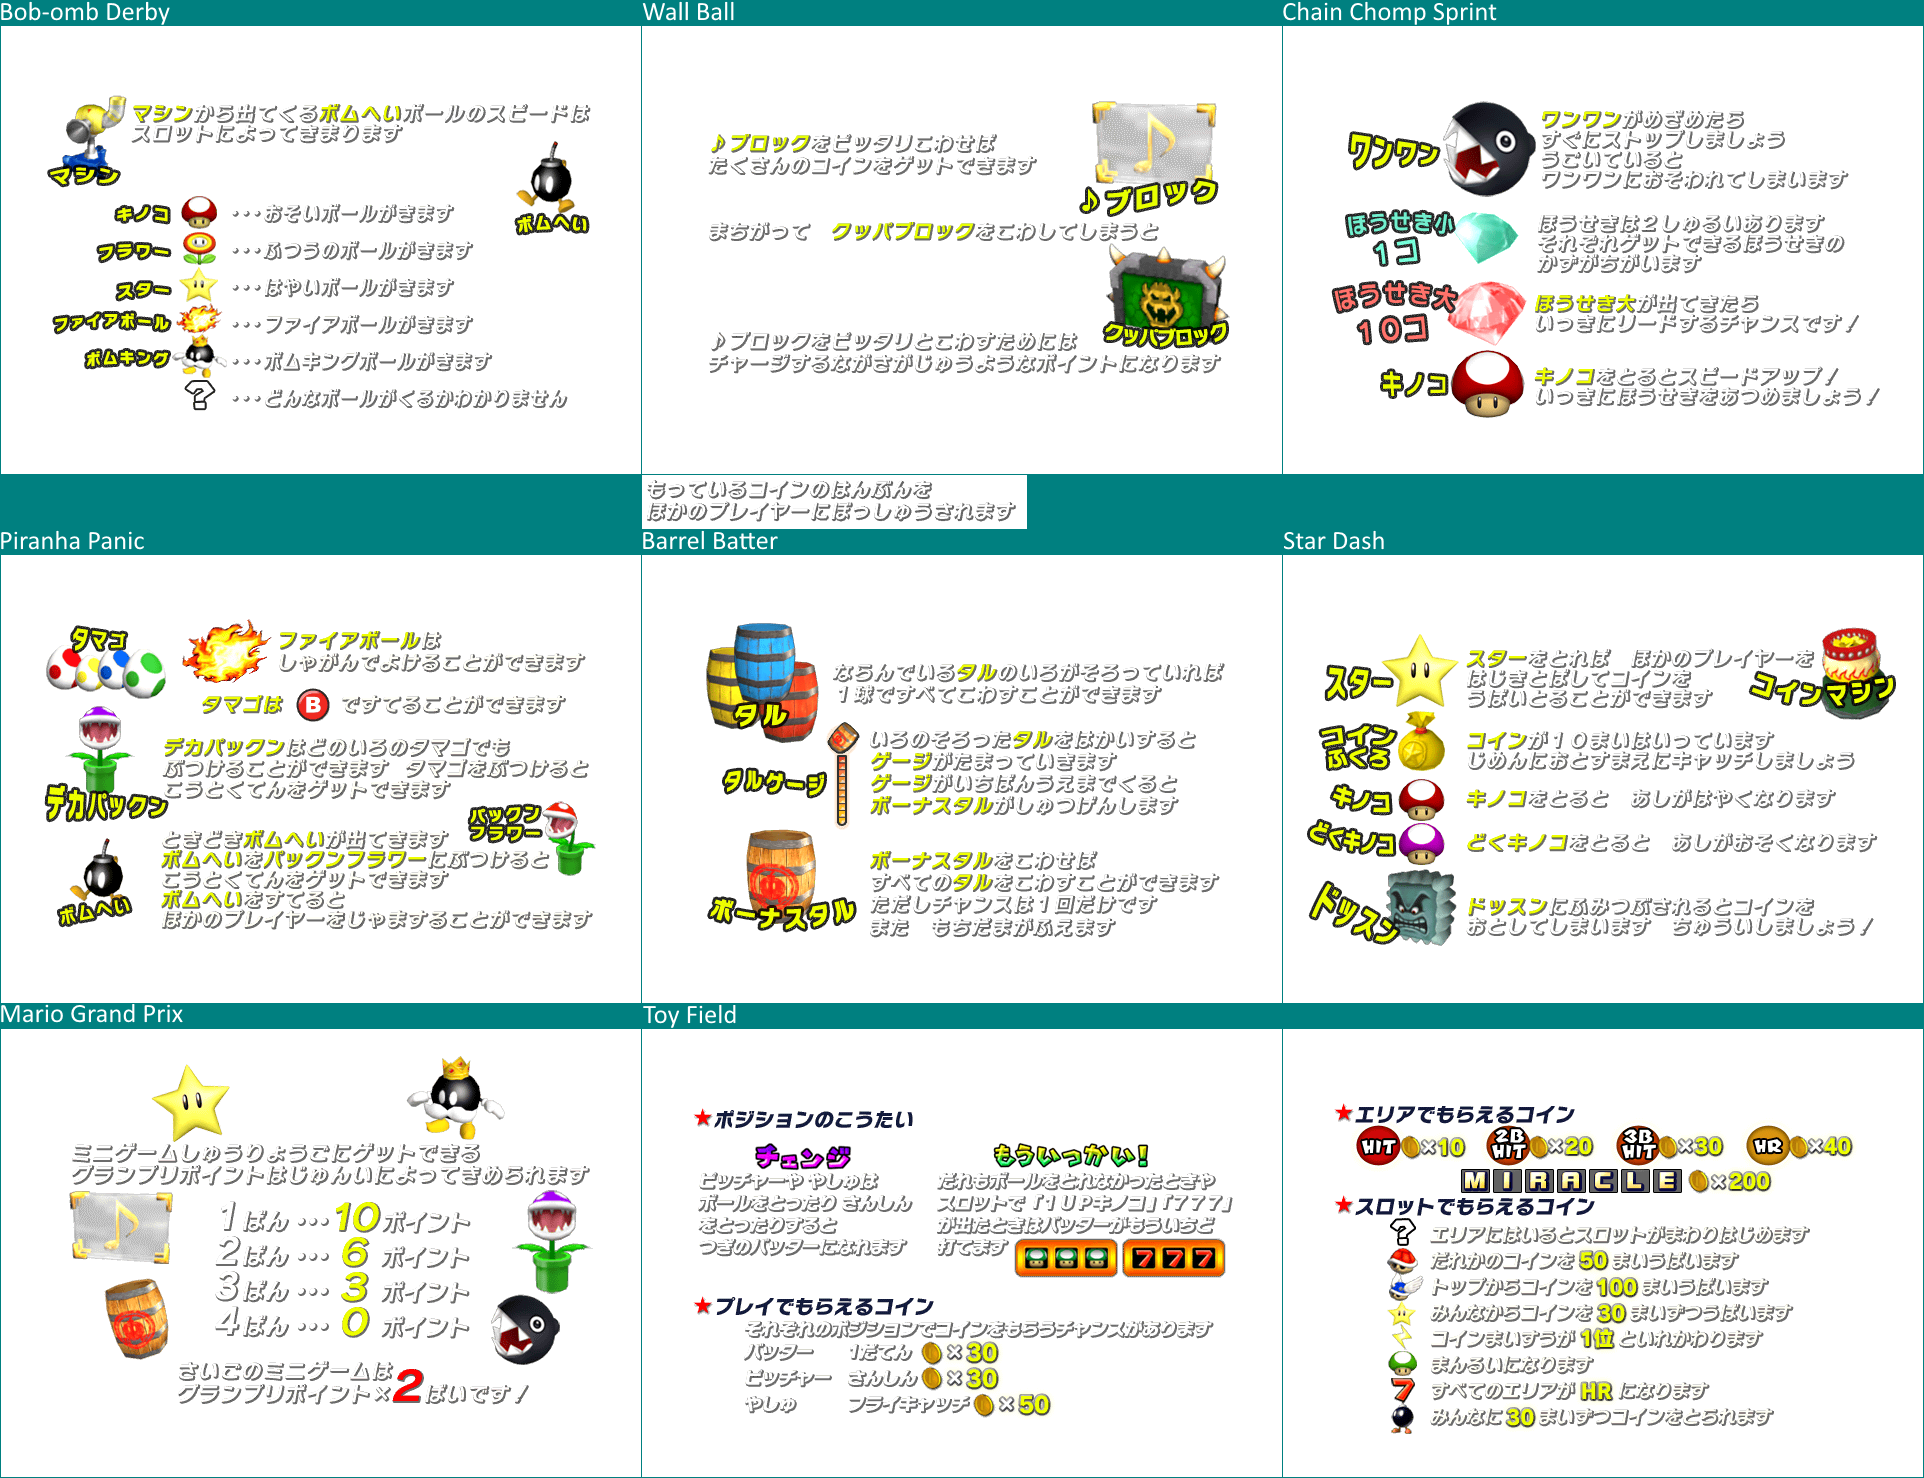 Mario Superstar Baseball - Minigame & Toy Field Rules (Japanese)